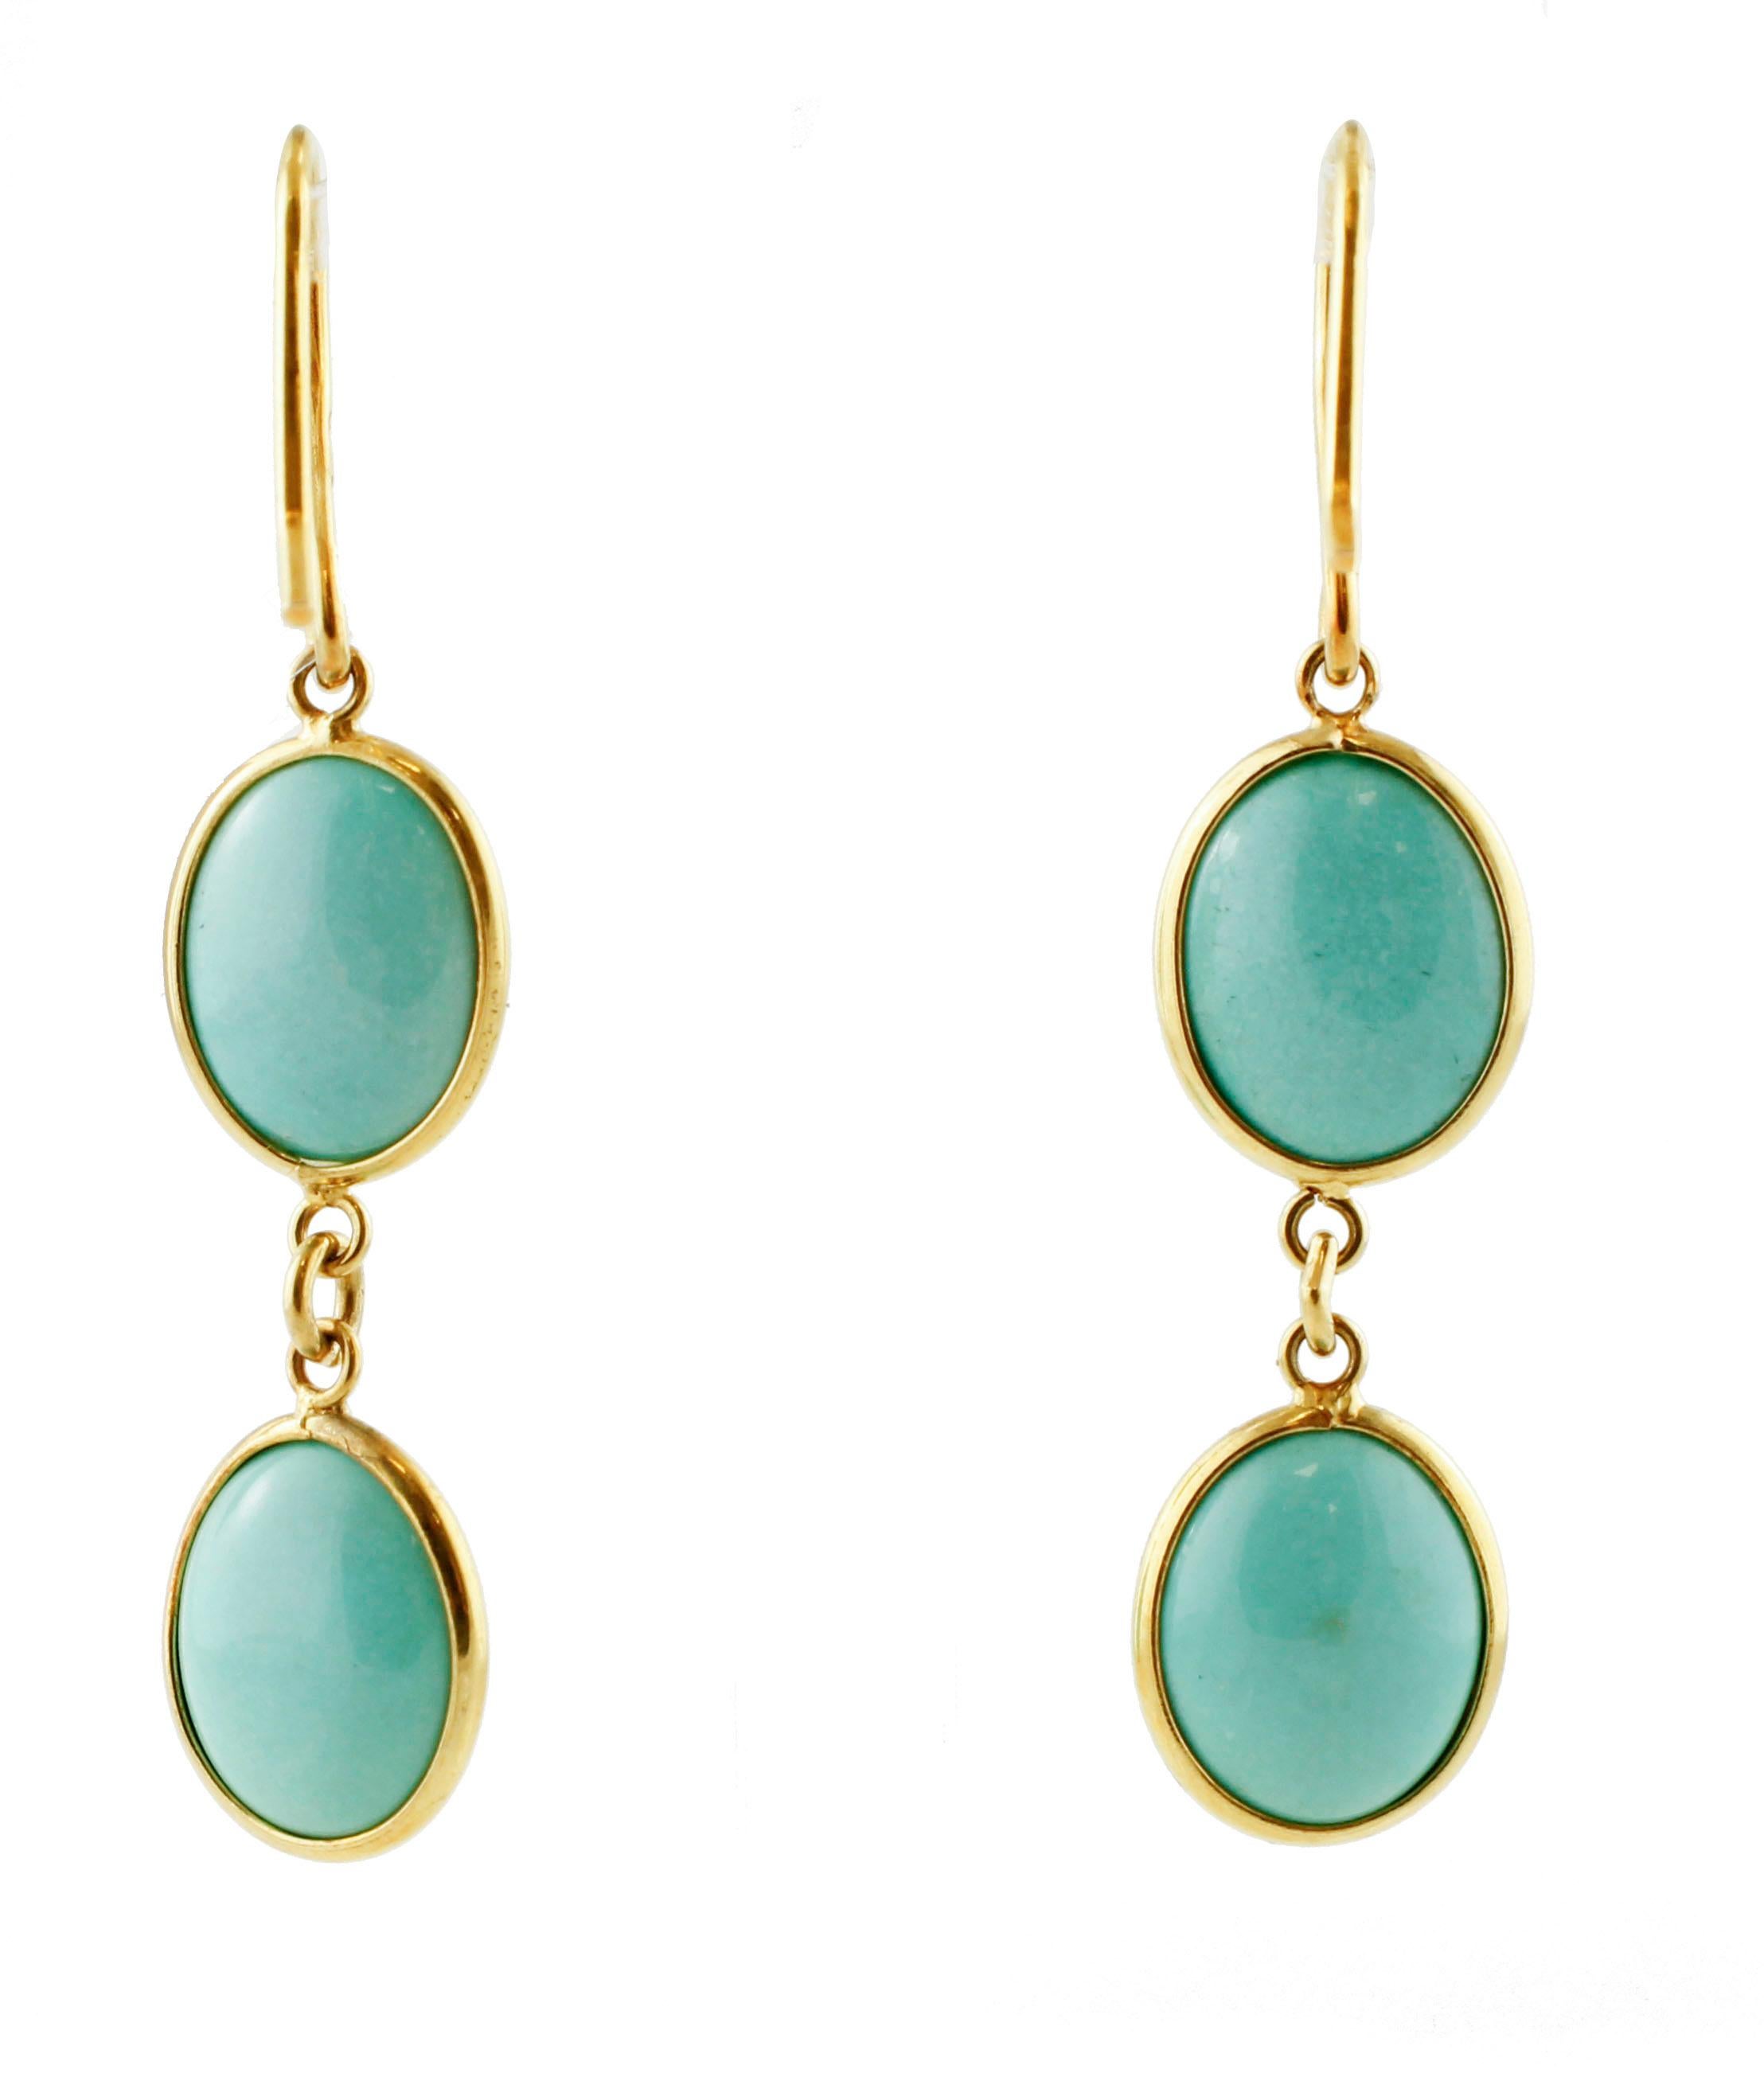 Very elegant and beautiful earrings realized in 18K yellow gold and mounted with 1.10 g of natural turquoise buttons (10 mm X 8 mm).
Natural Turquoise 1.10 g 
Total Weight 3 g 
R.F + uhr
K. AOF,AF
Length 4 cm 

For any enquires, please contact the